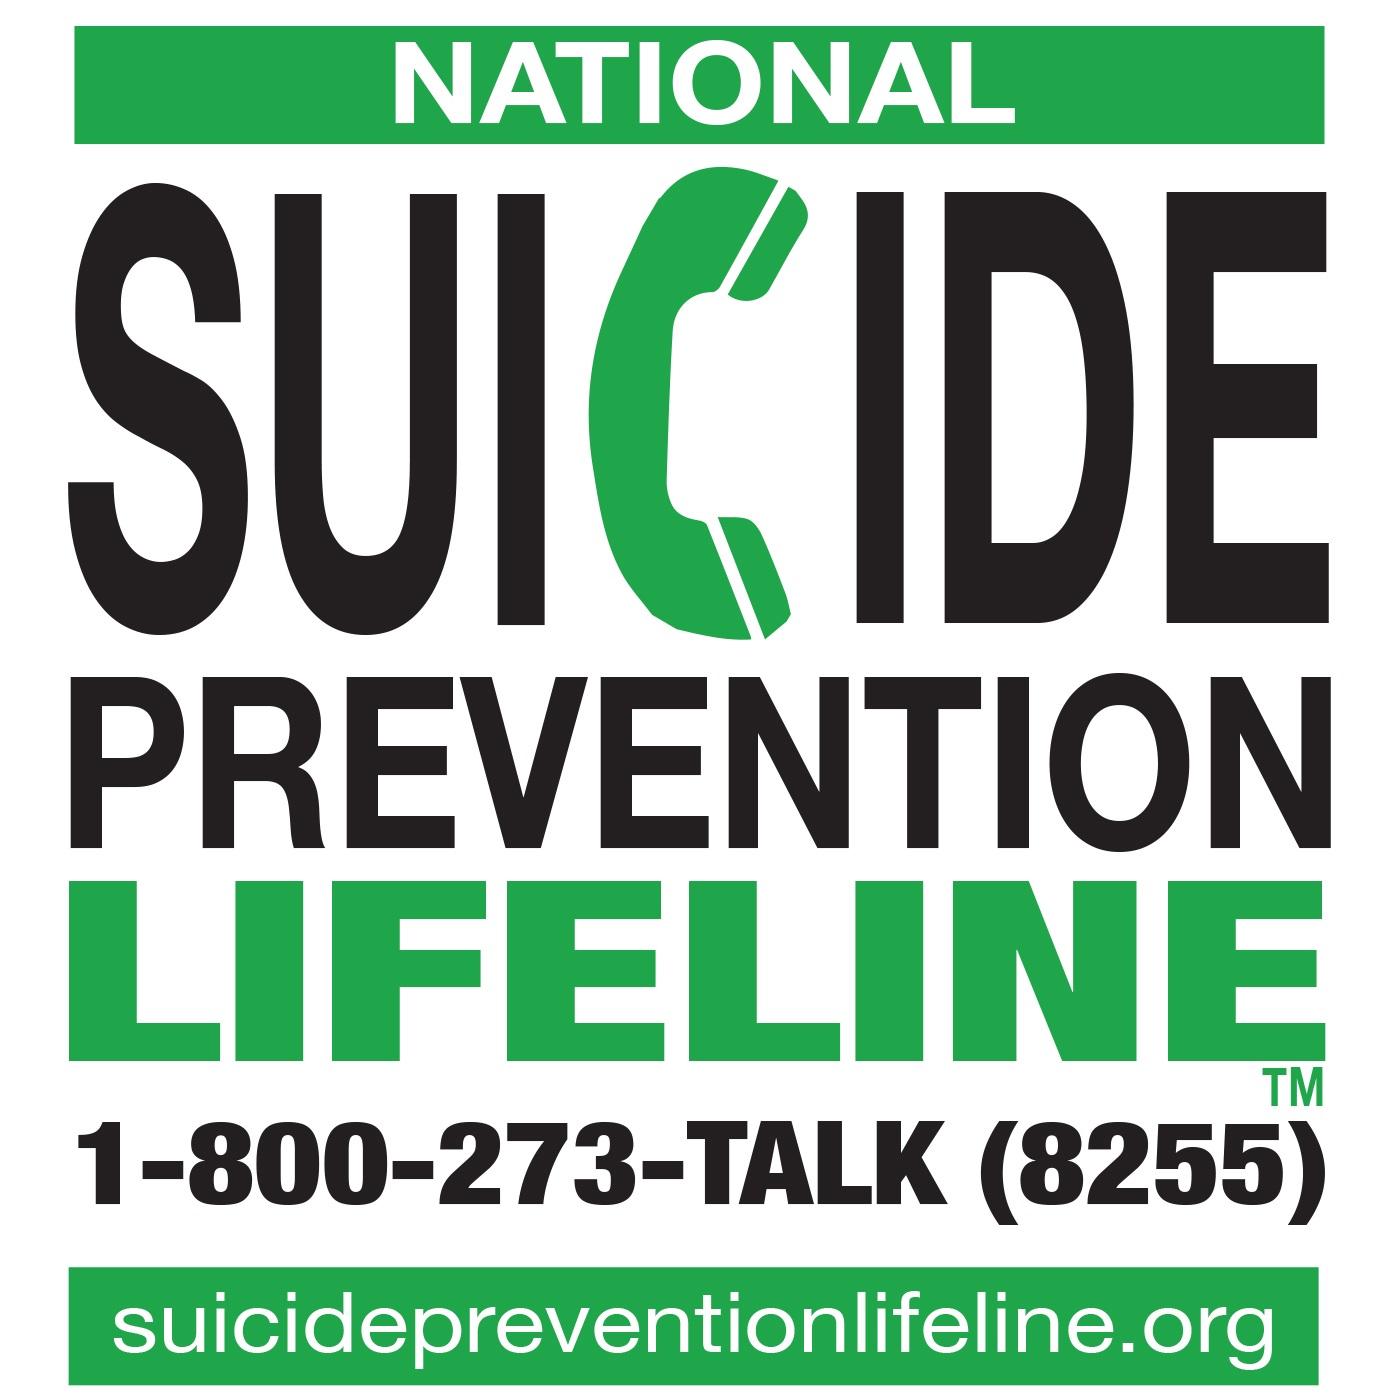 Link to National Suicide Prevention Lifeline